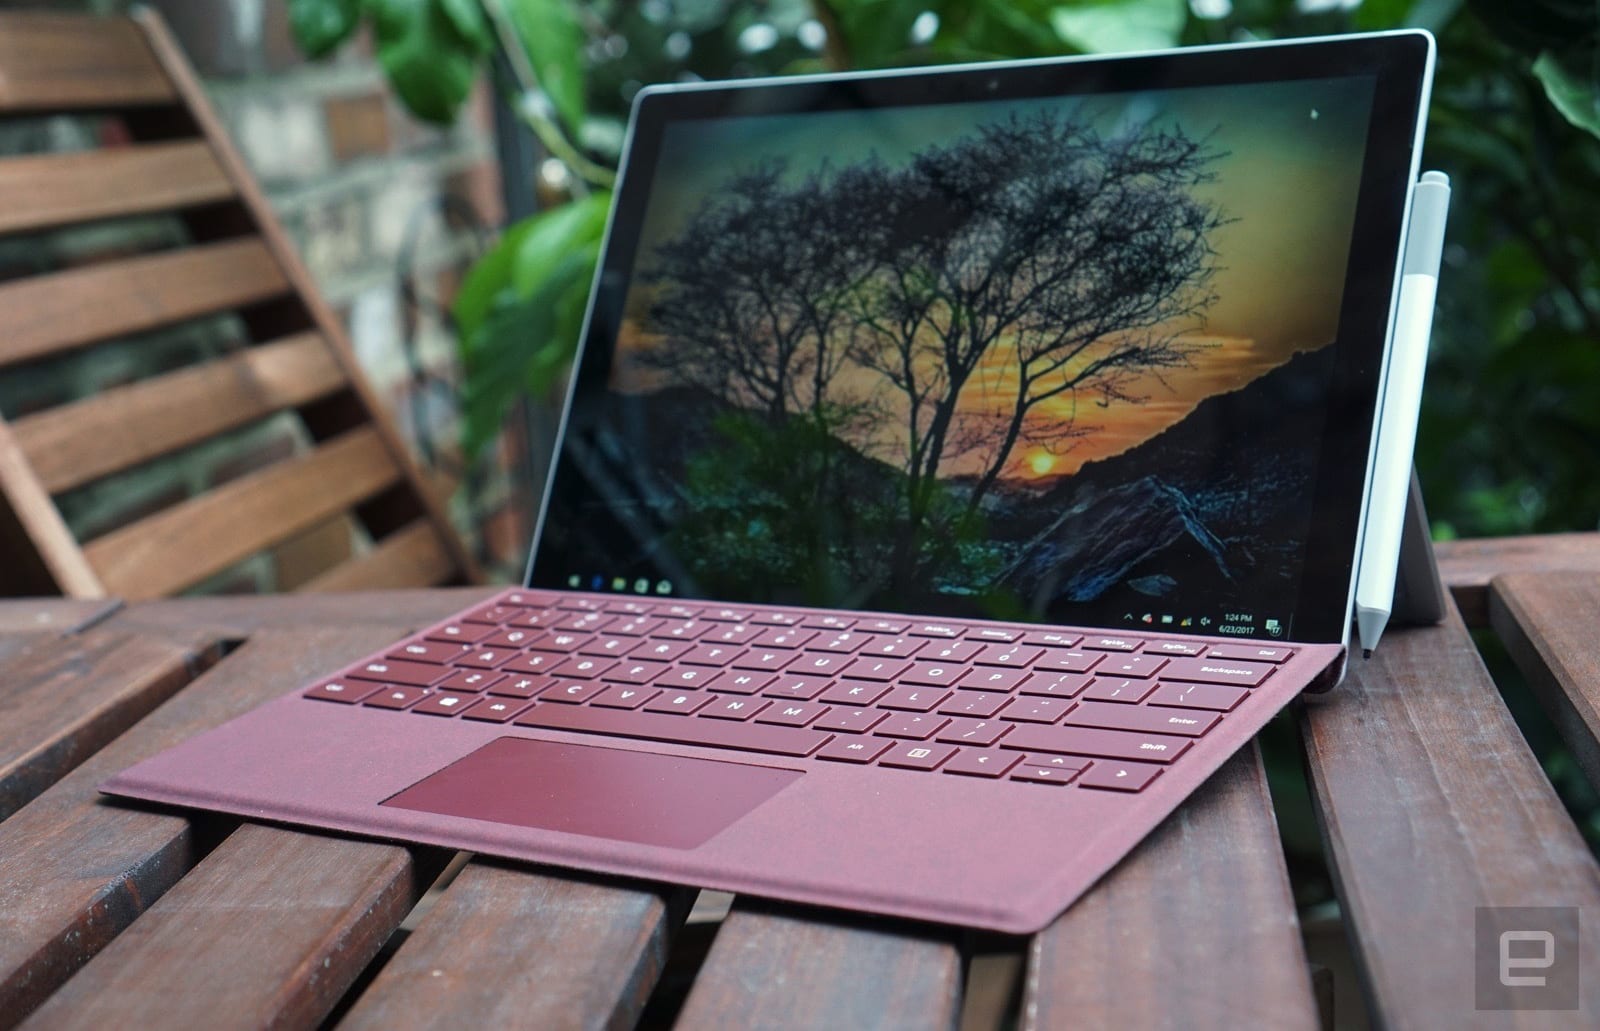 Microsoft's Surface is back in Consumer Reports' good graces1600 x 1031